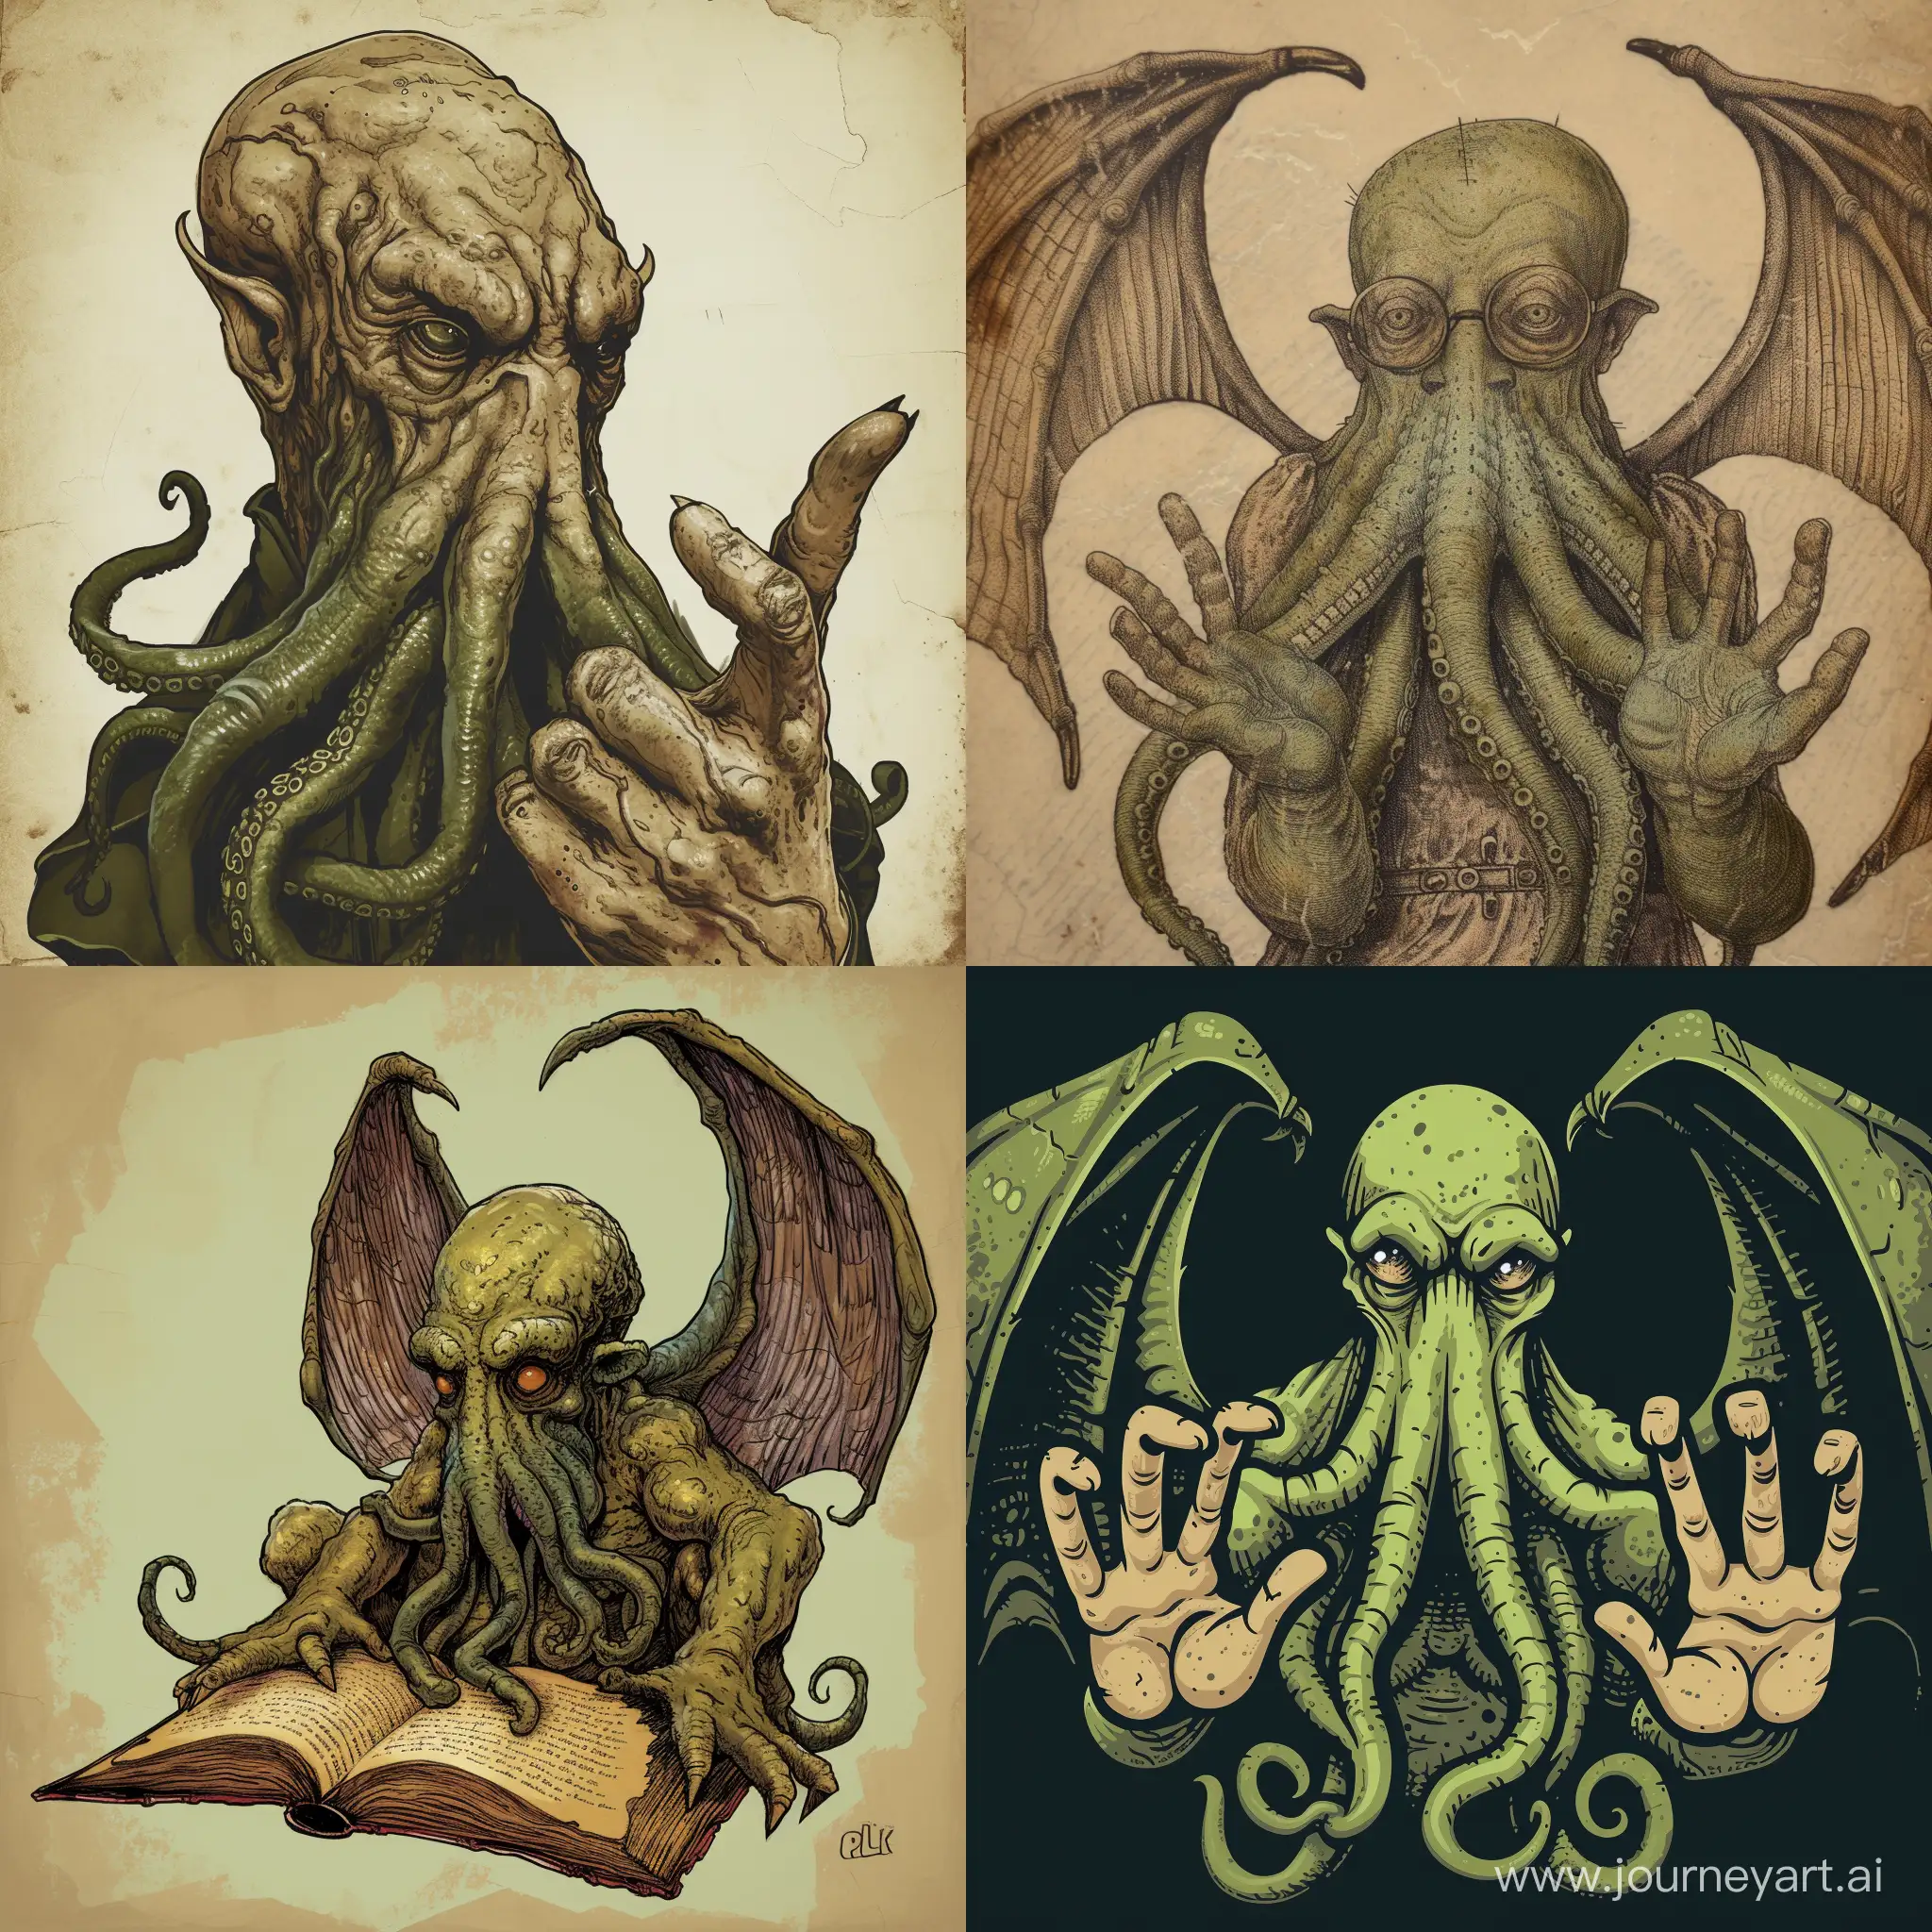 Polite-Cthulhu-Offering-Life-Advice-in-a-Surreal-Encounter